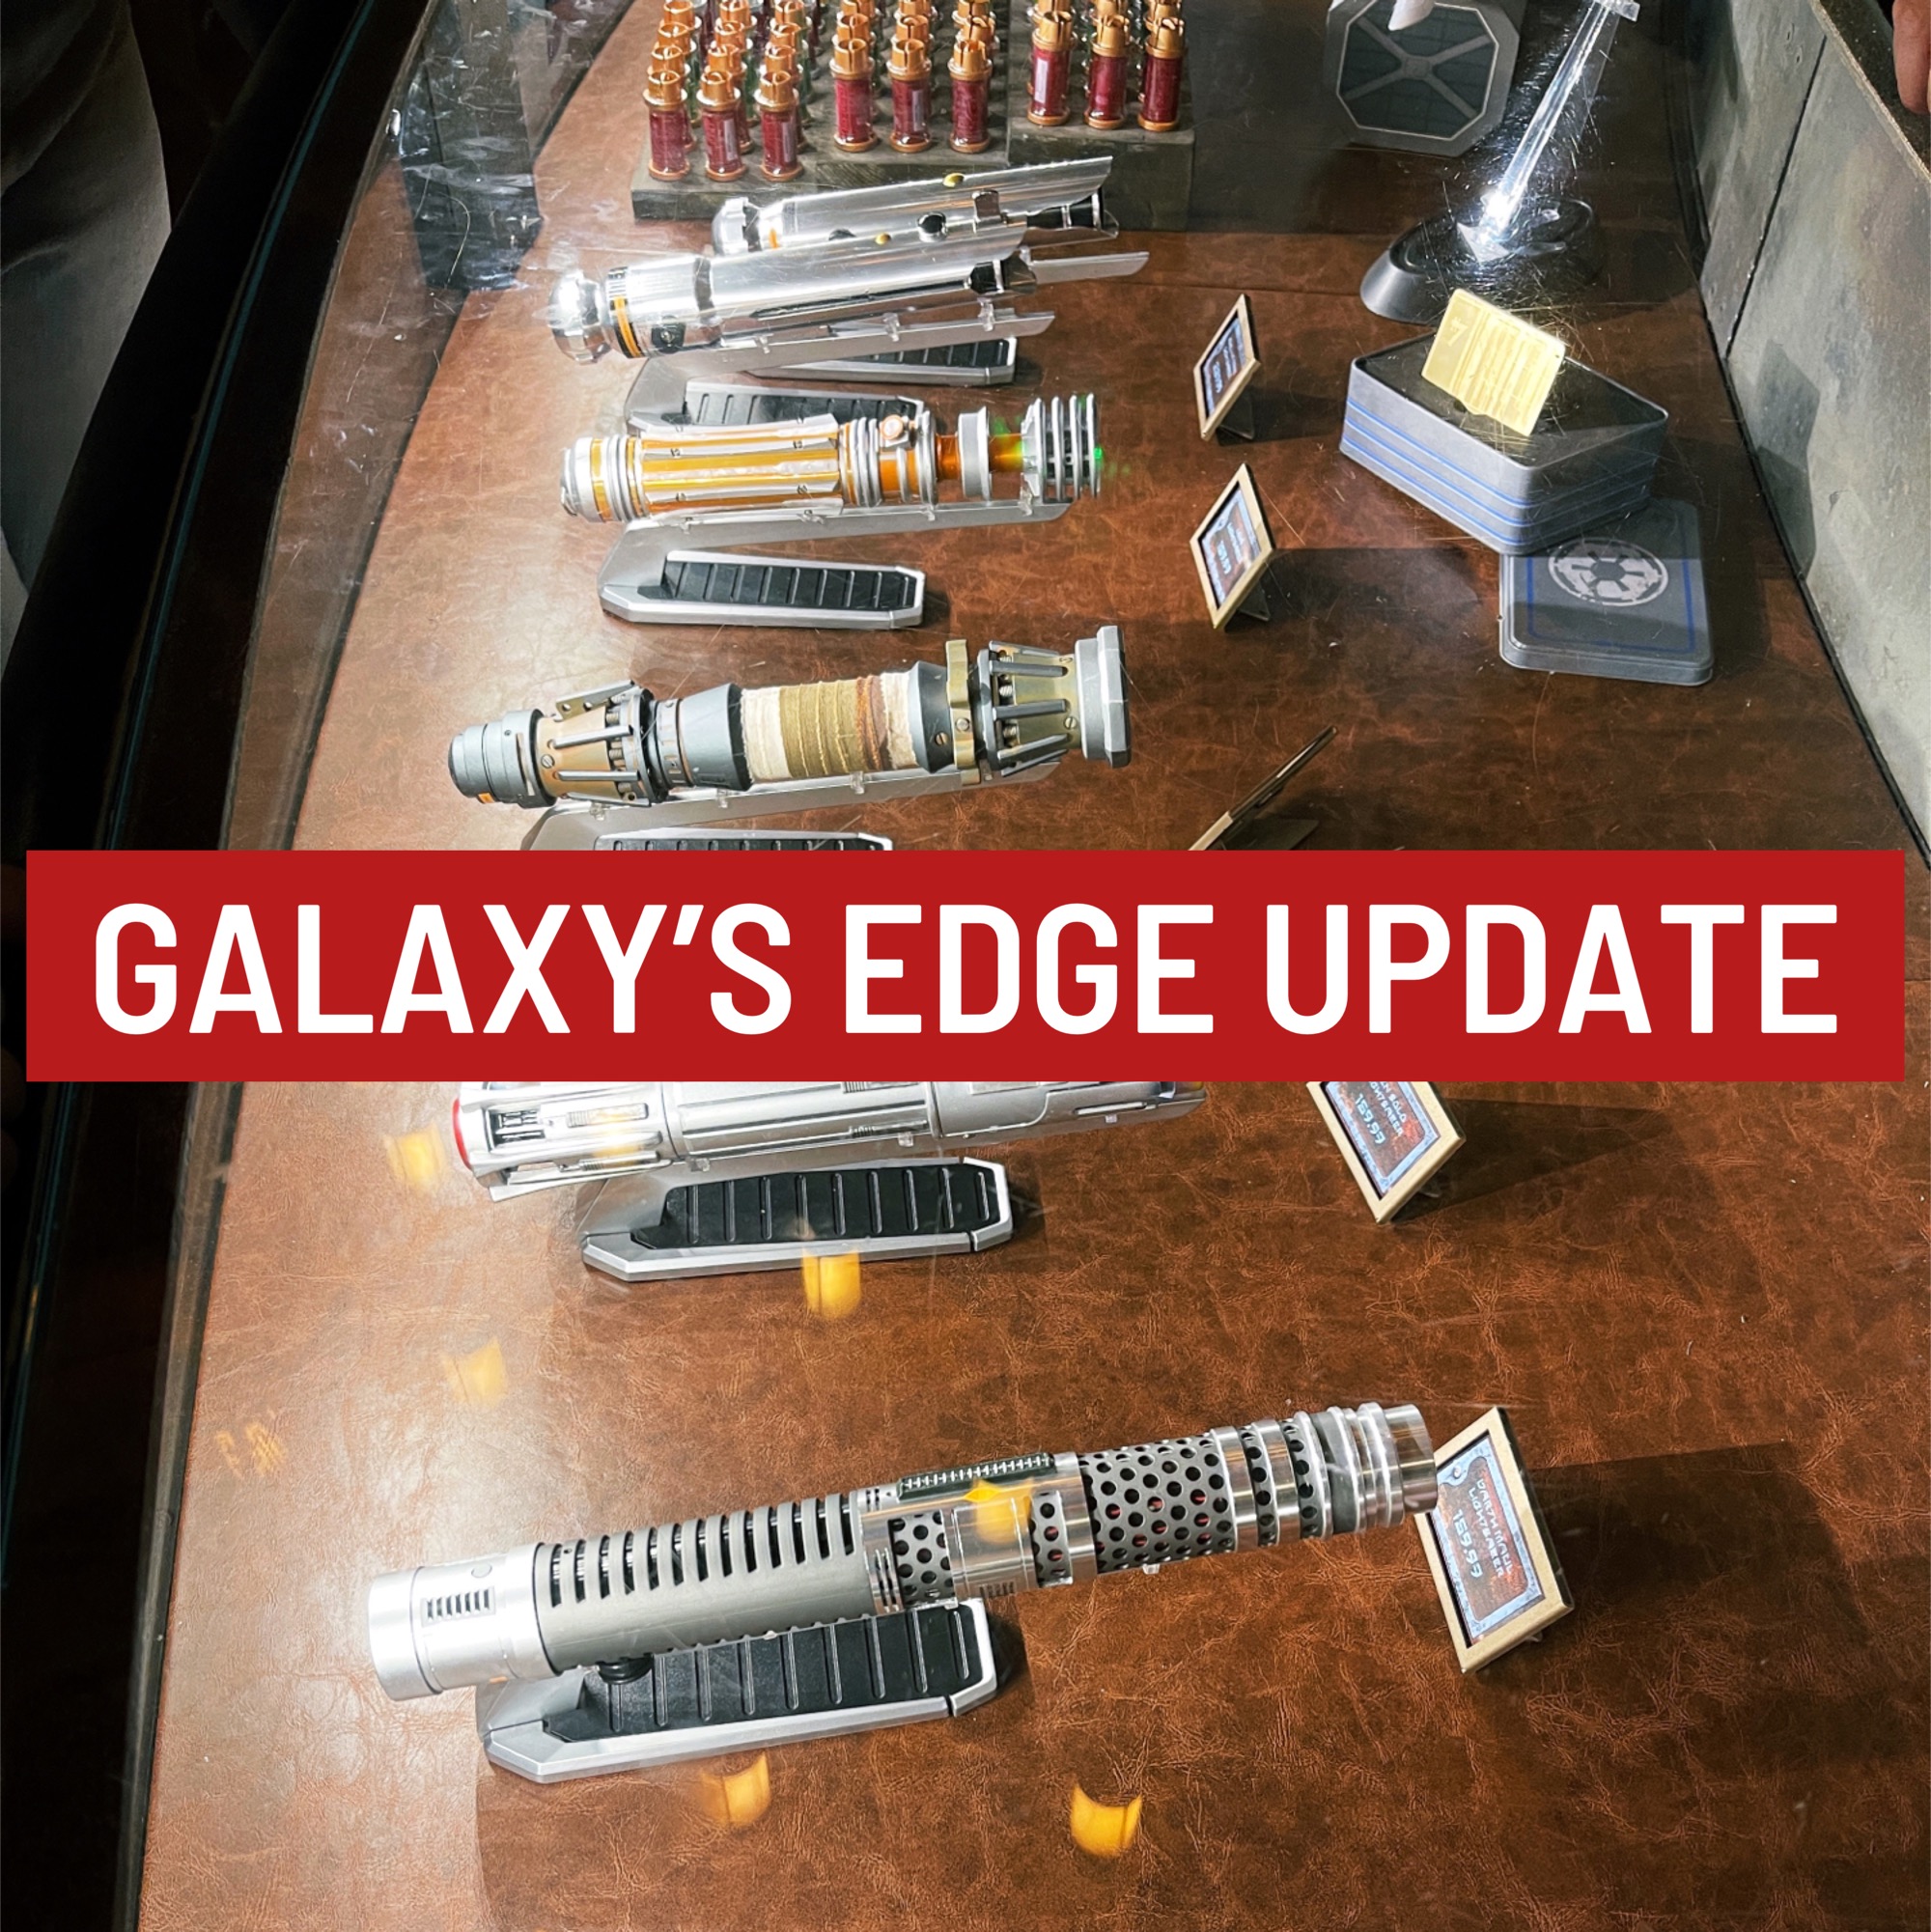 Star Wars: Galaxy's Edge - Maul Shadow Legacy Lightsaber , Poe's Bandolier & More! | Anakin and His Angel